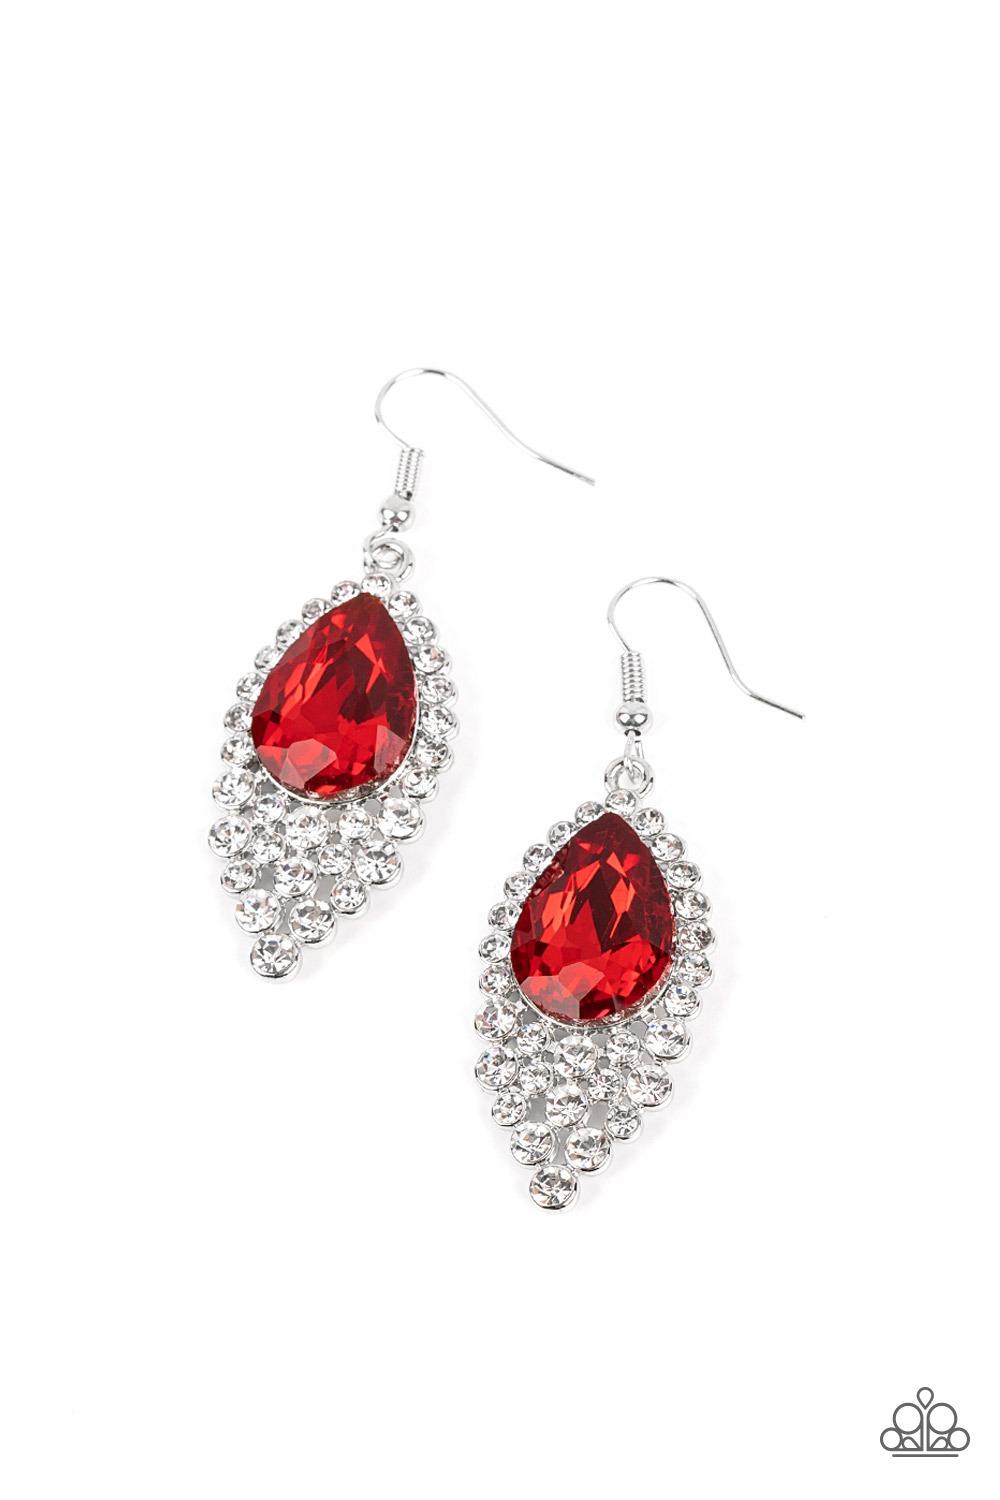 Earring - Glorious Glimmer - Red